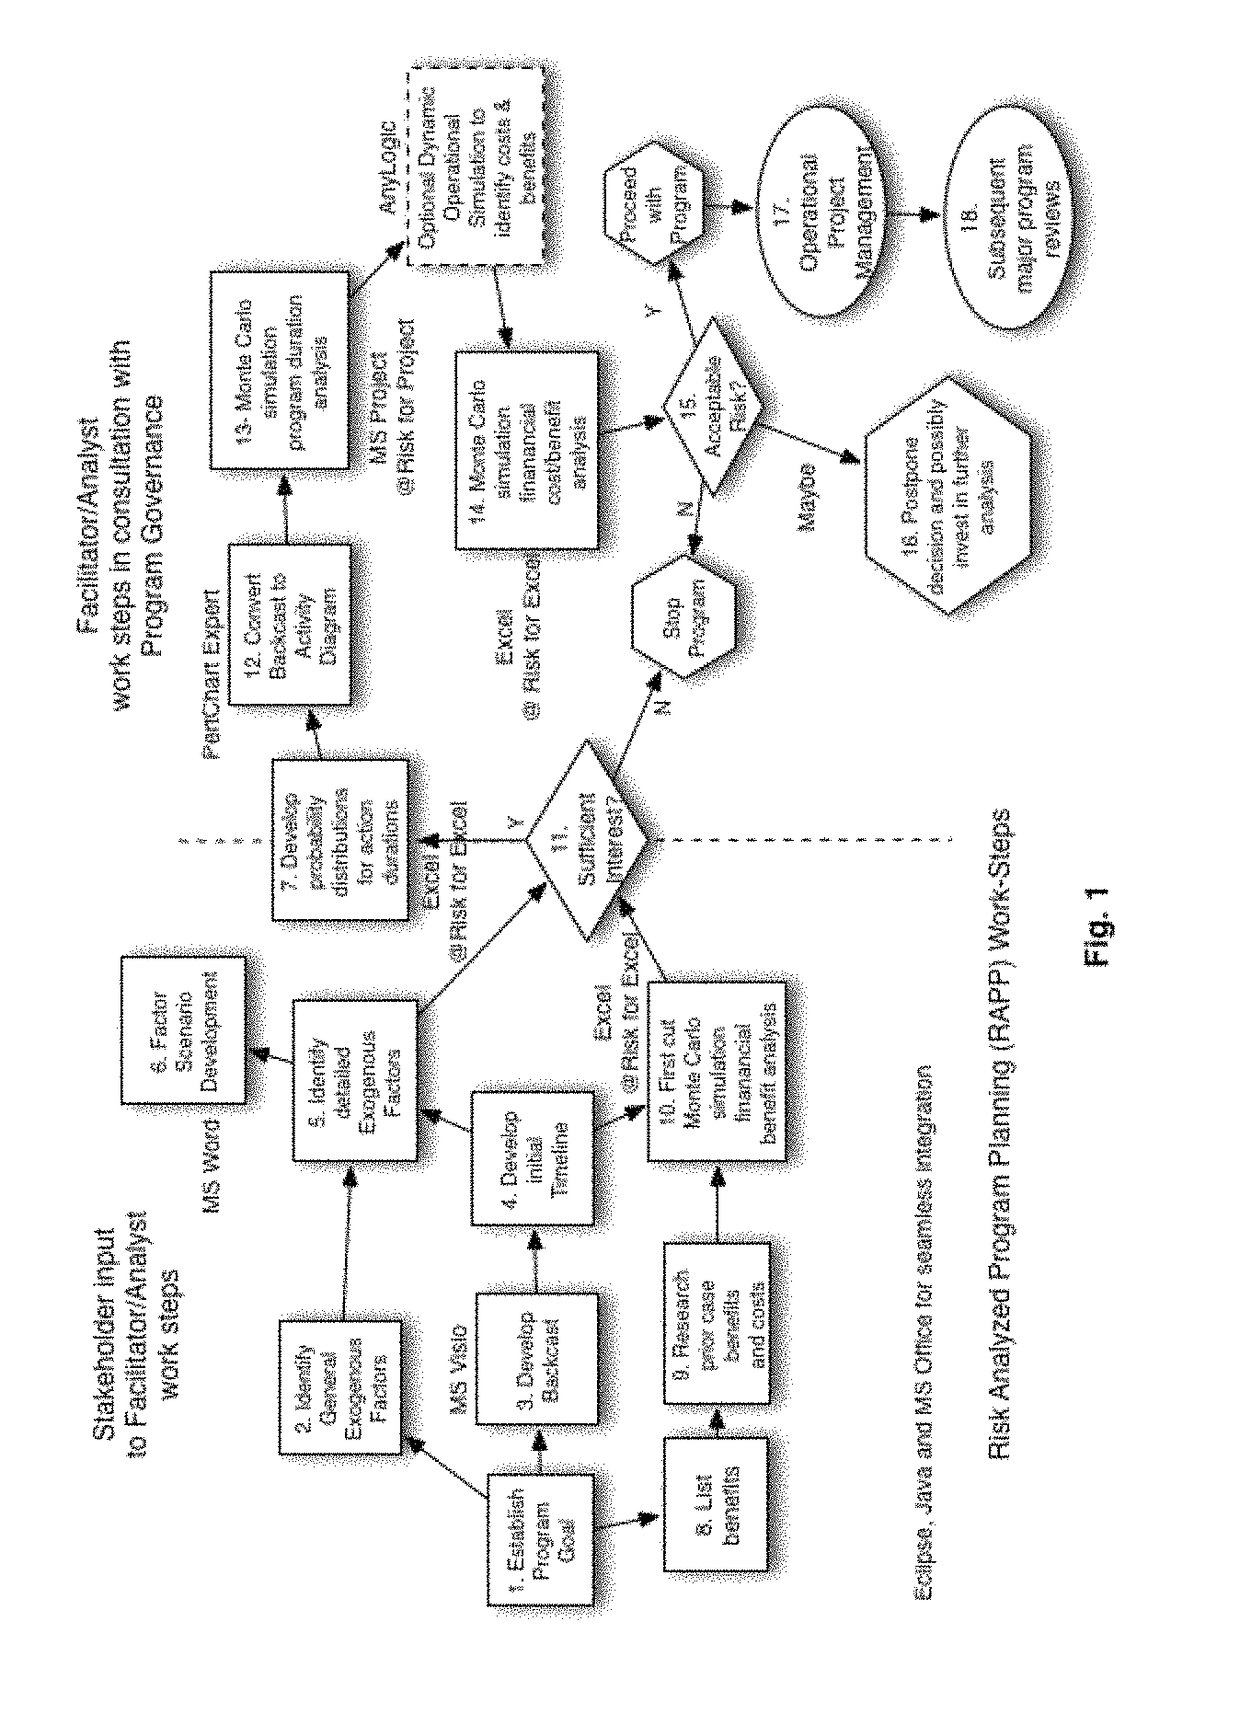 System and method for risk analyzed program planning (RAPP)